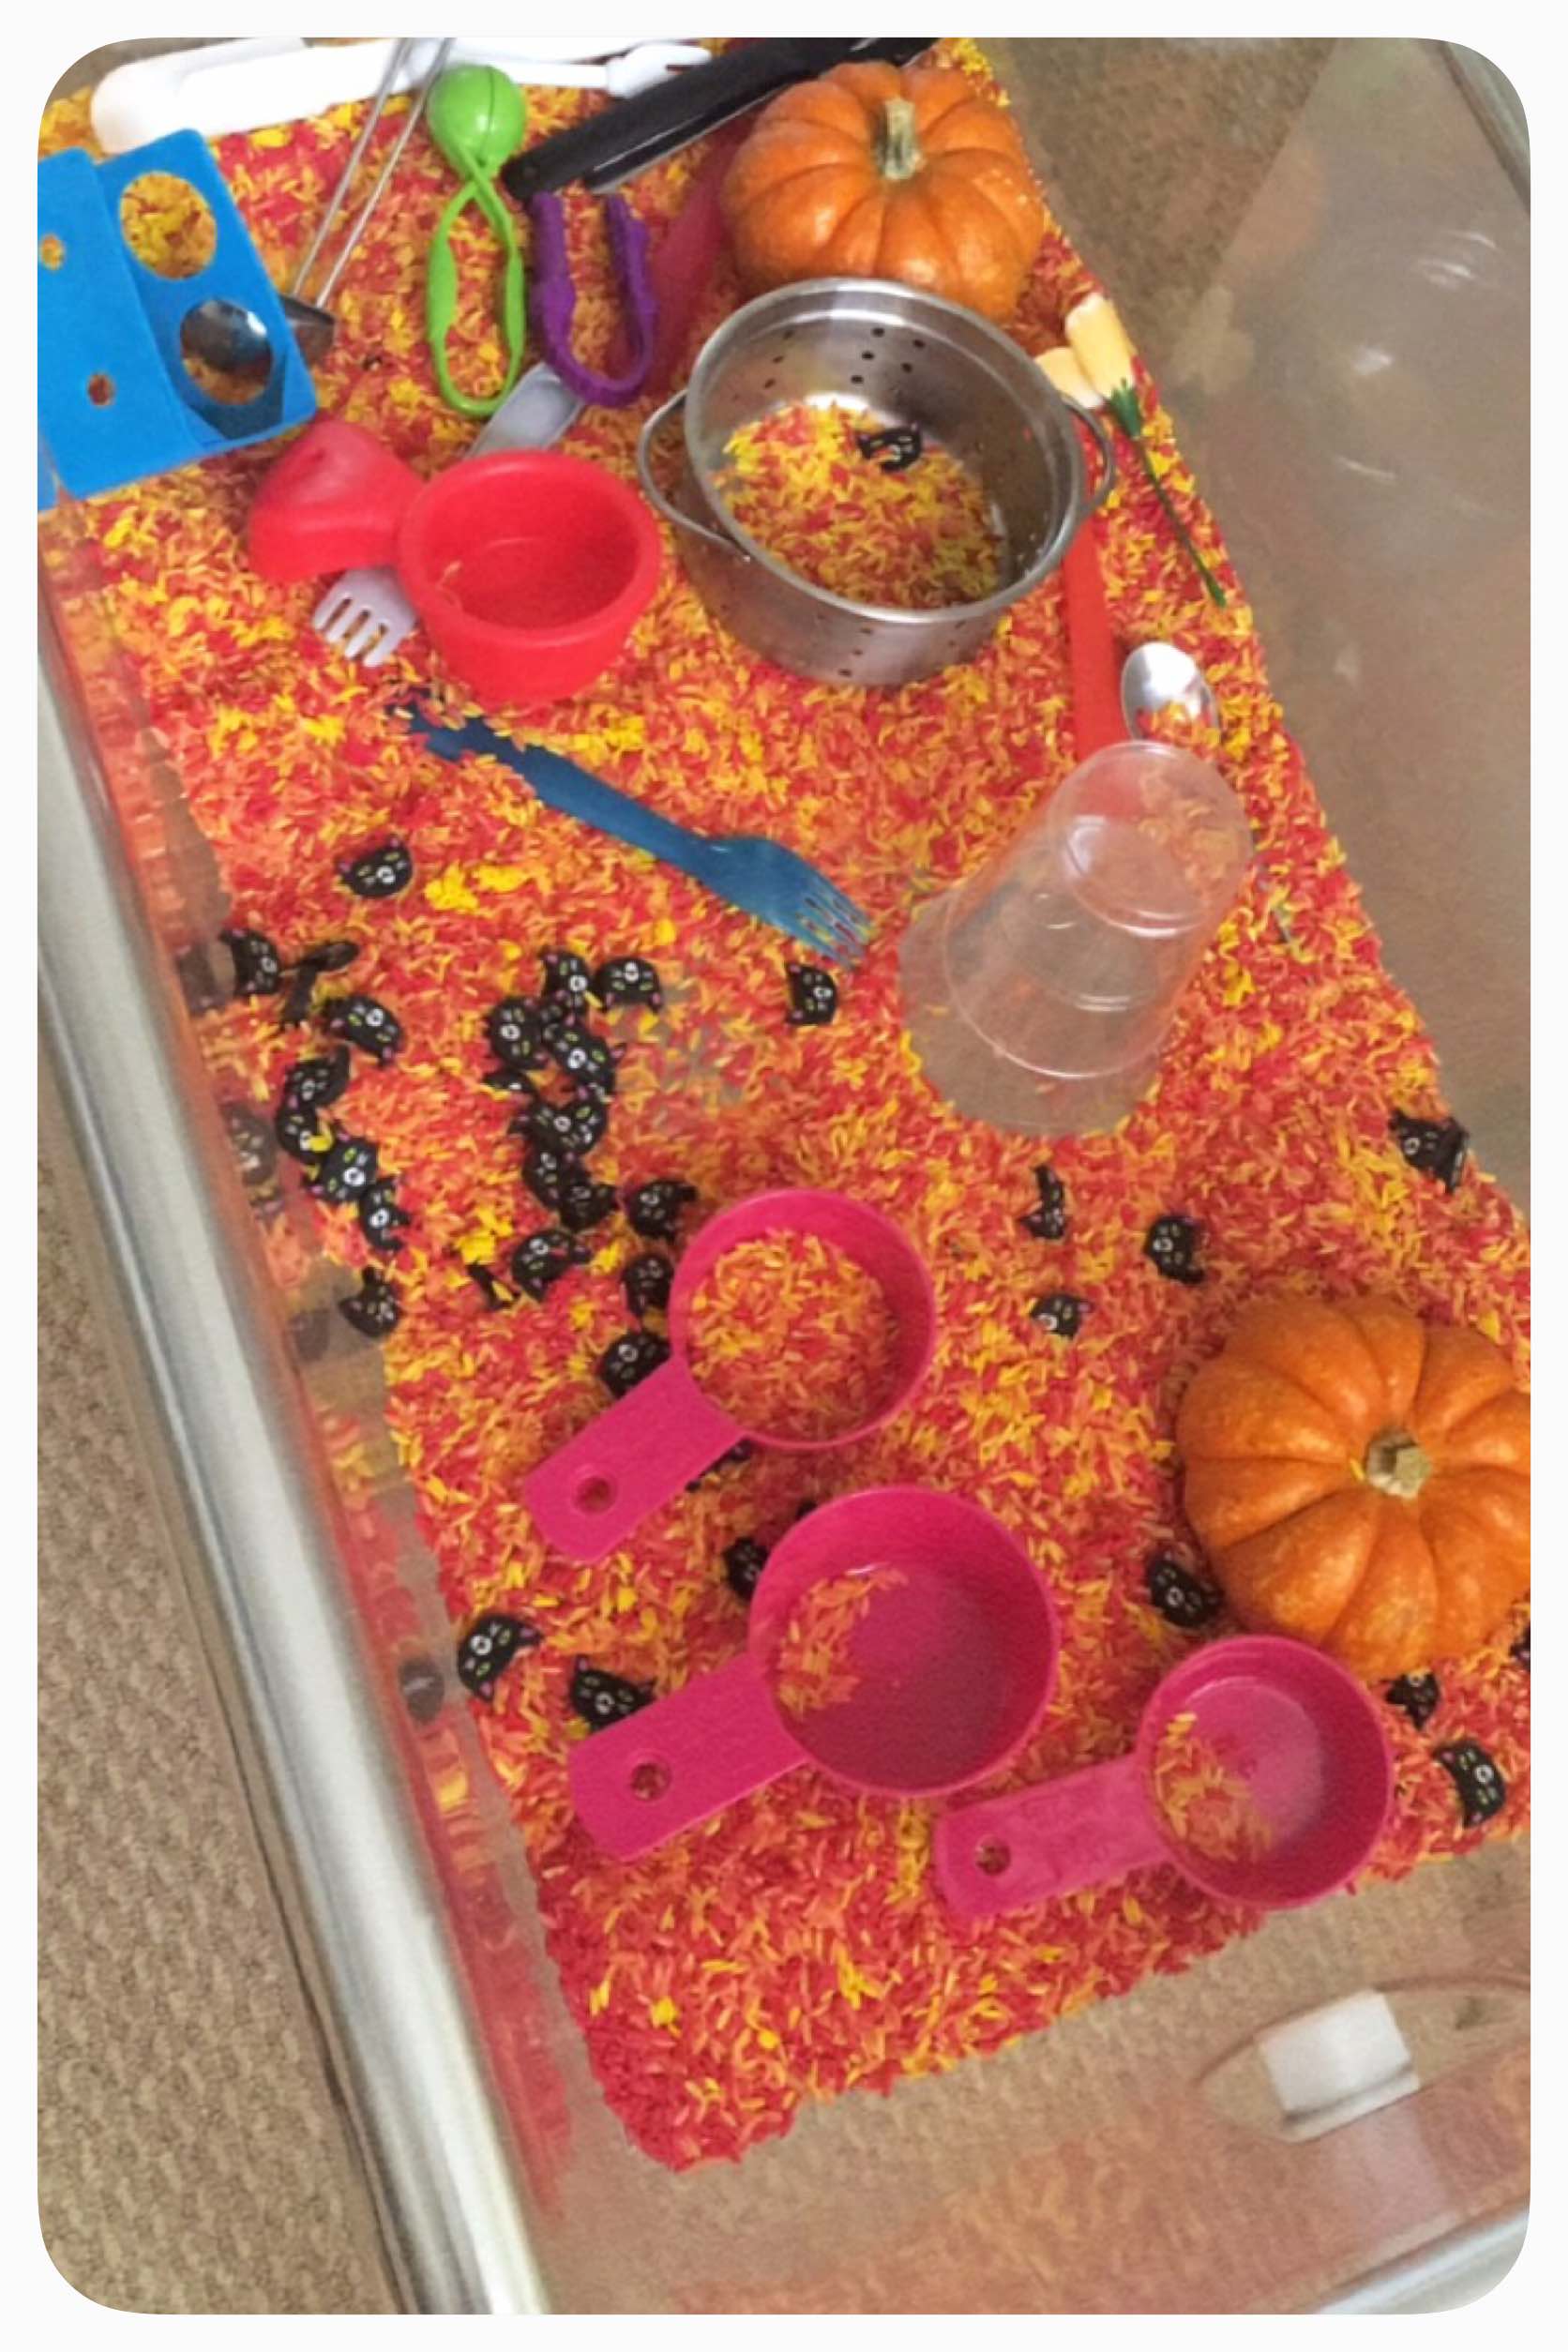 Fall Sensory Bin - Amazing how much play kids can get out of such simple sensory materials. Acrylic paints to dye the rice .